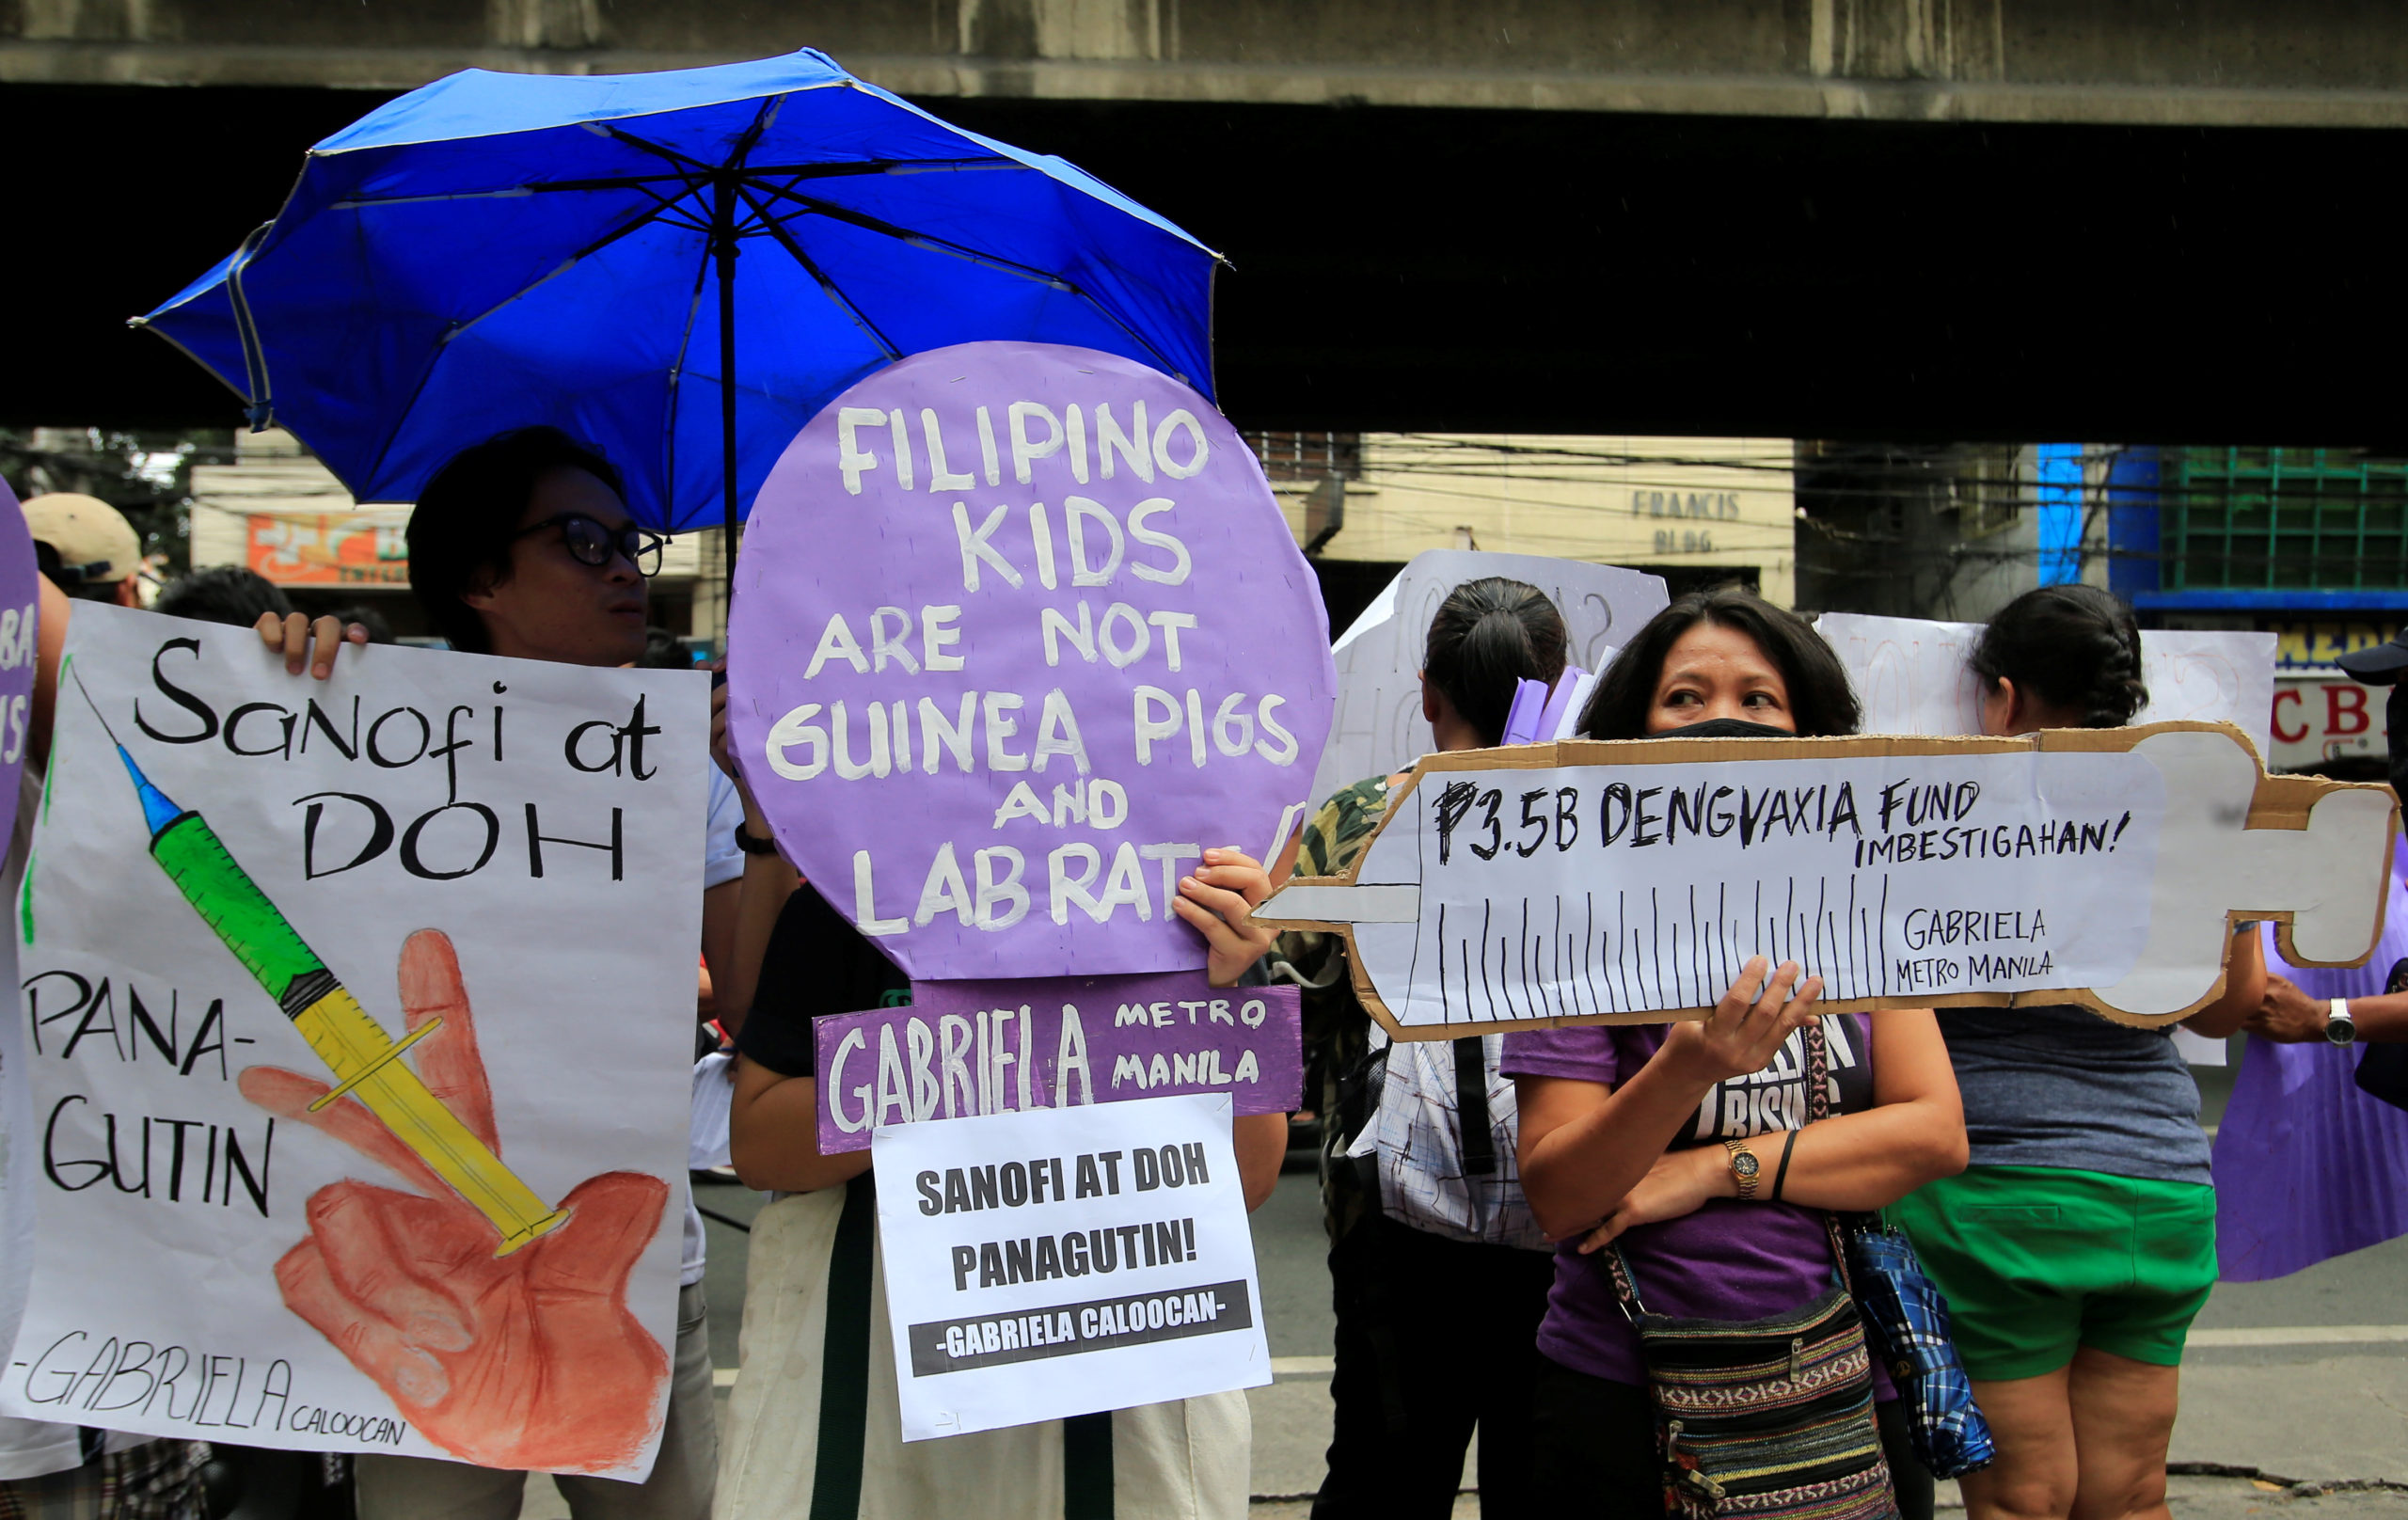 People display signs and a mock syringe, with the phrase "3.5 billion pesos Dengvaxia fund investigate" featured on it, during a protest in front of the Philippine Department of Health (DOH) in metro Manila, Philippines December 5, 2017. The poster (L) reads: "Sanofi and DOH should be held accountable". REUTERS/Romeo Ranoco